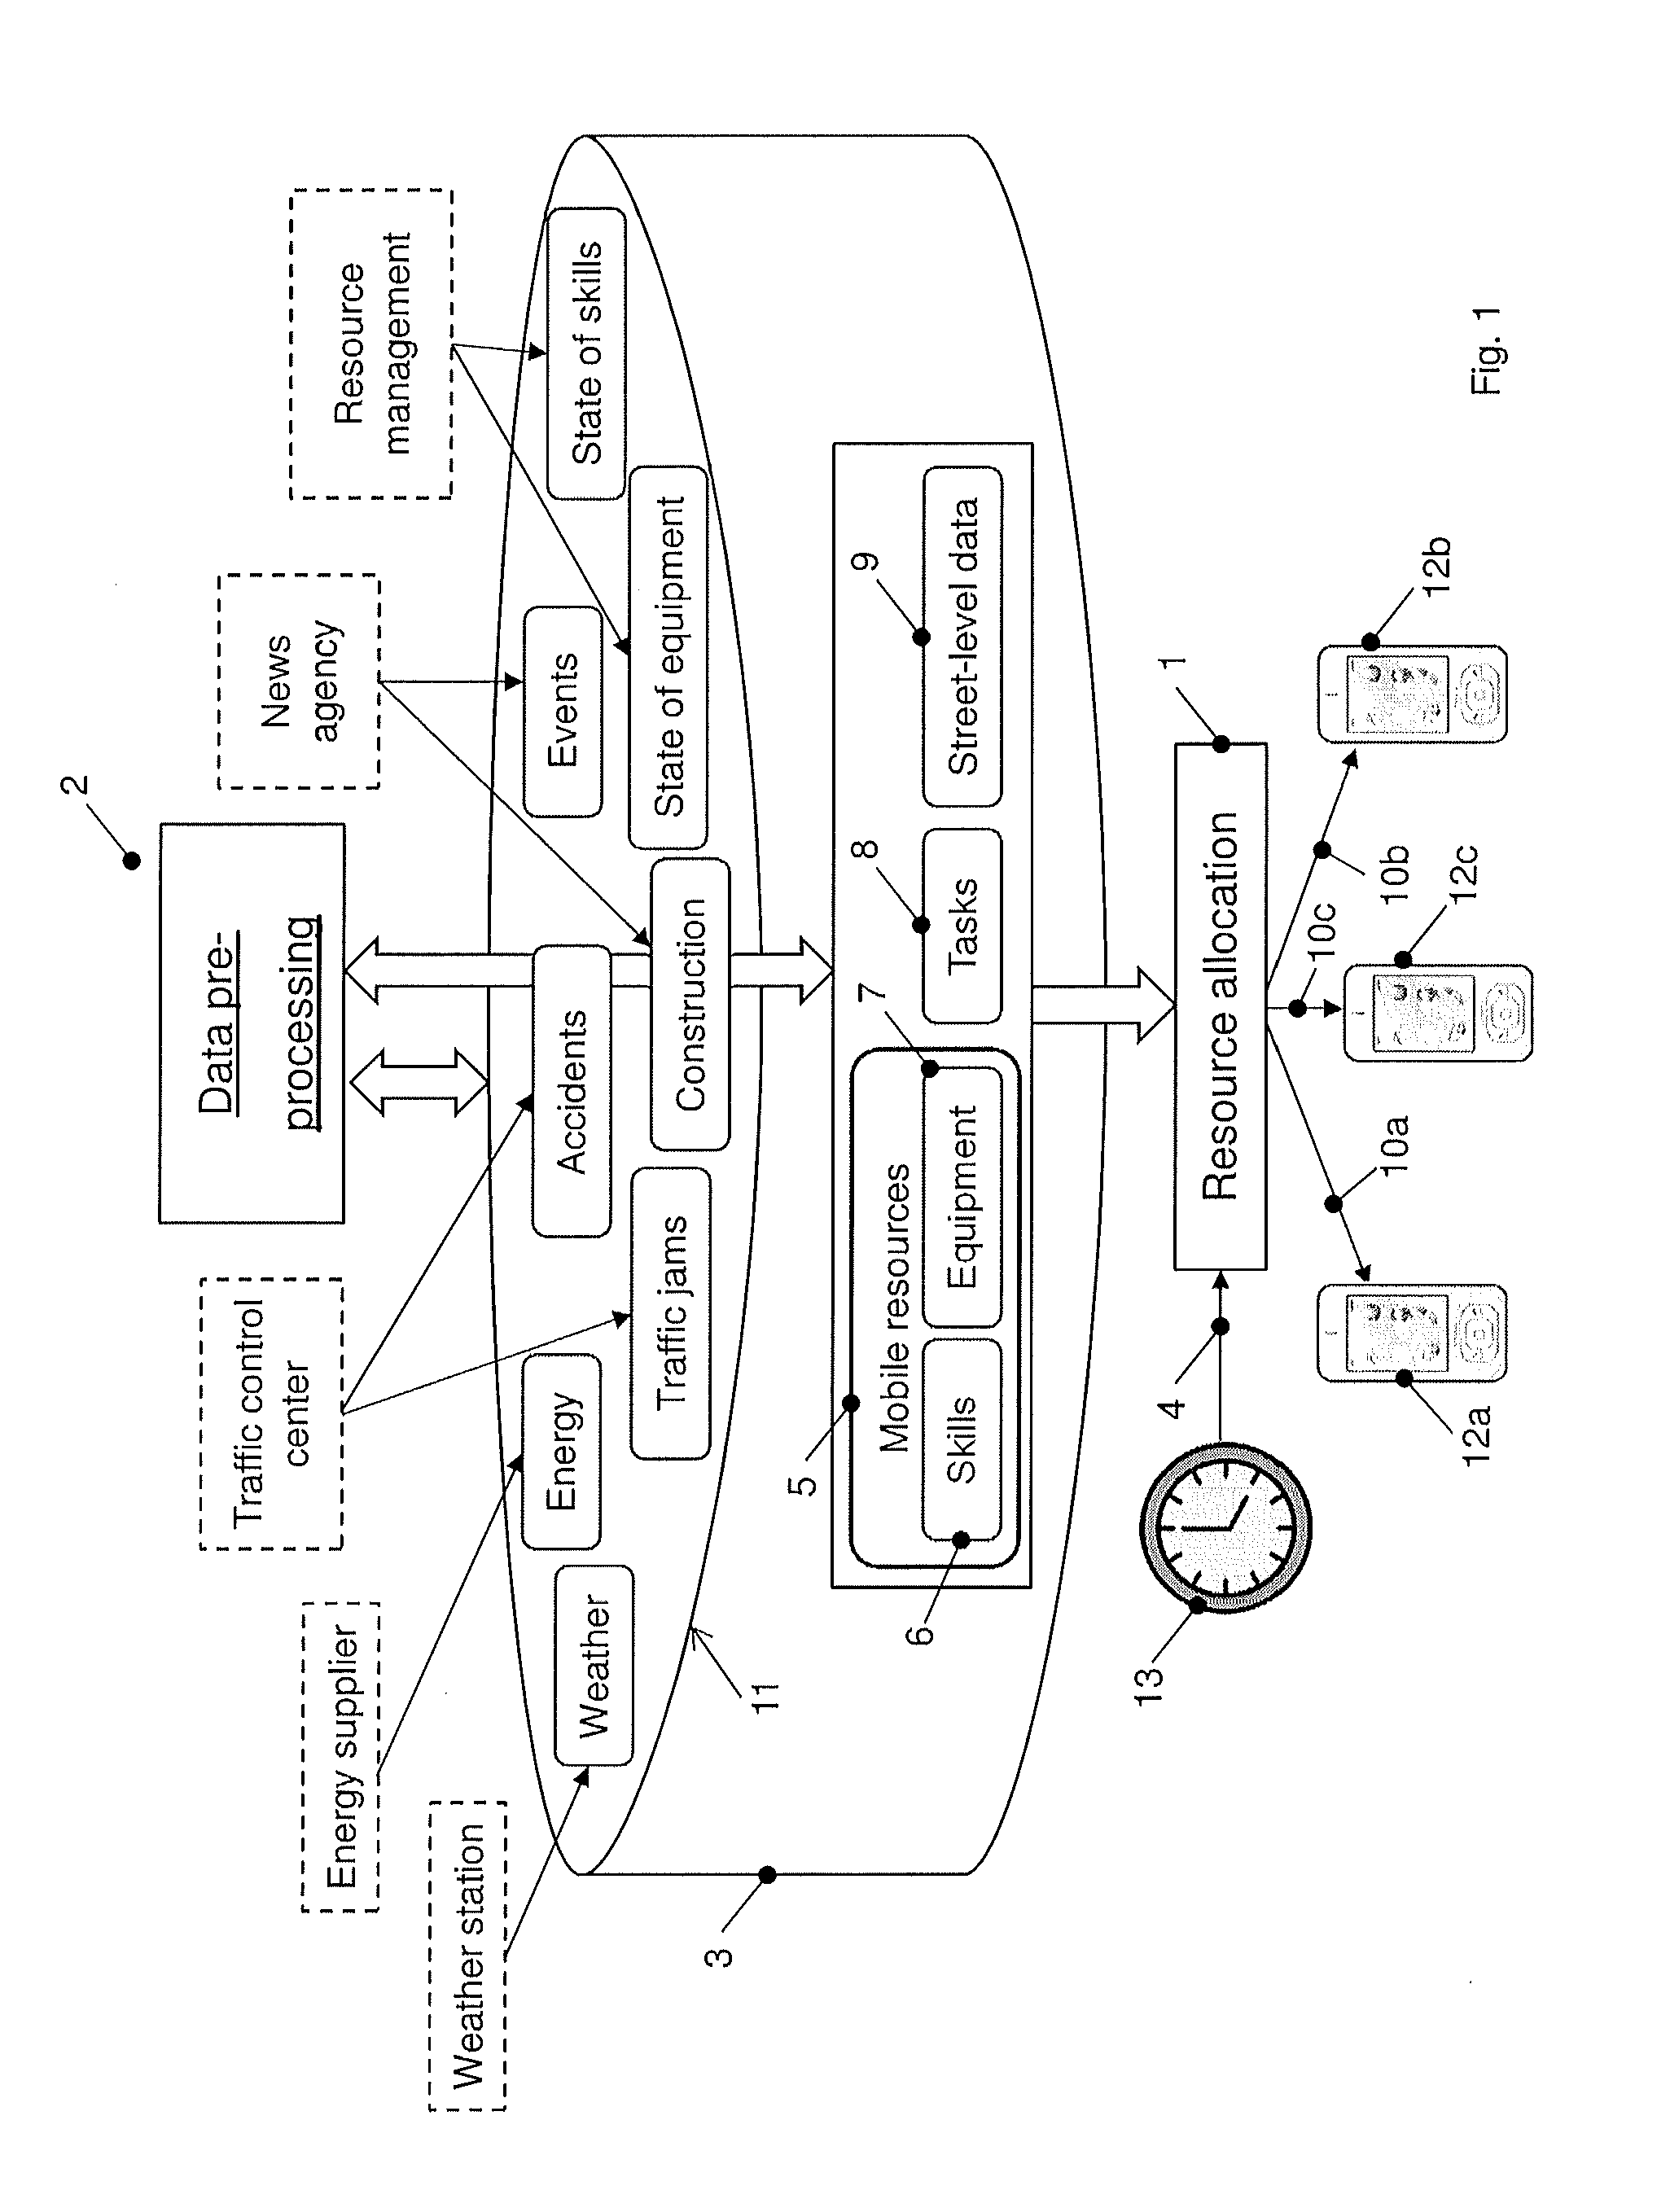 System and method for automatic allocation of mobile resources to tasks